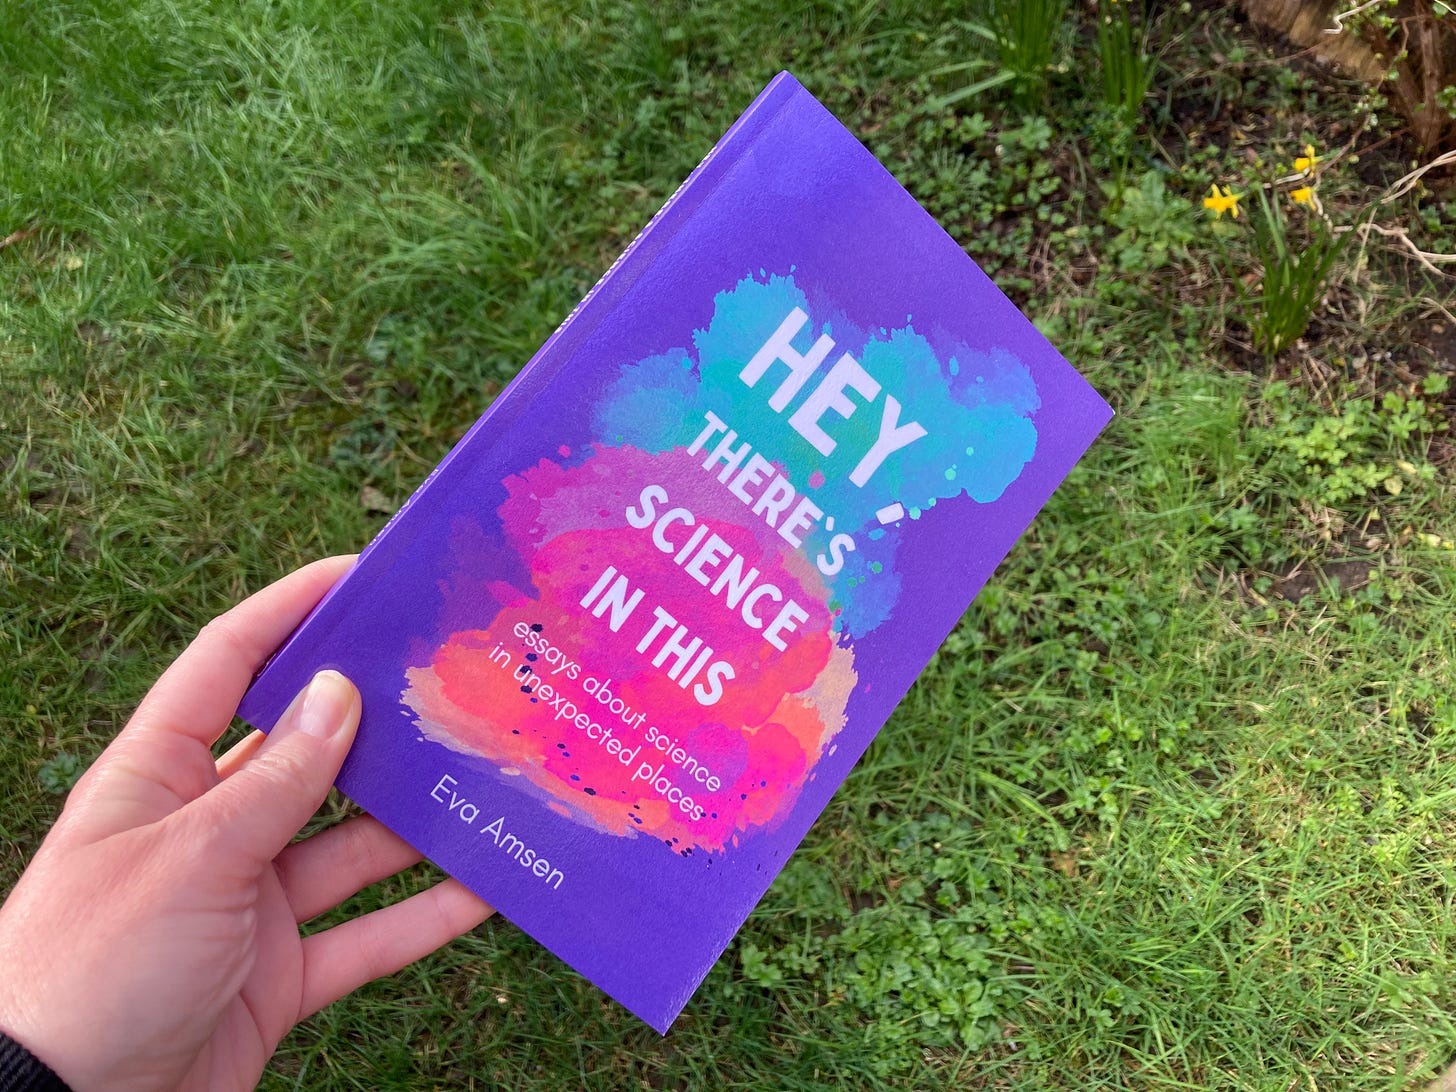 Hey, There's Science In This. Purple book being held above grass